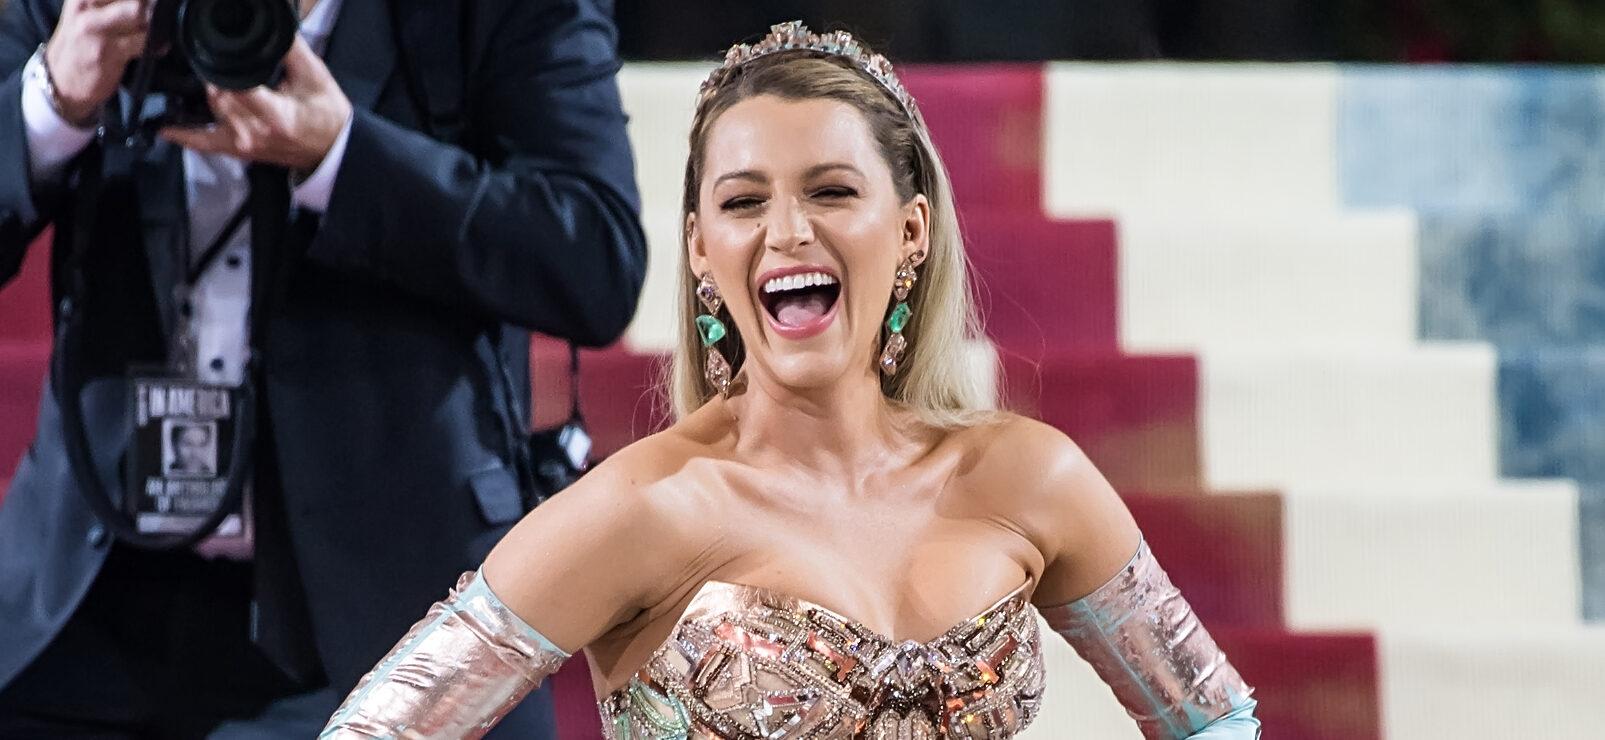 Blake Lively Reveals Hilarious Way She Deals With Wardrobe Malfunction Amid Pregnancy